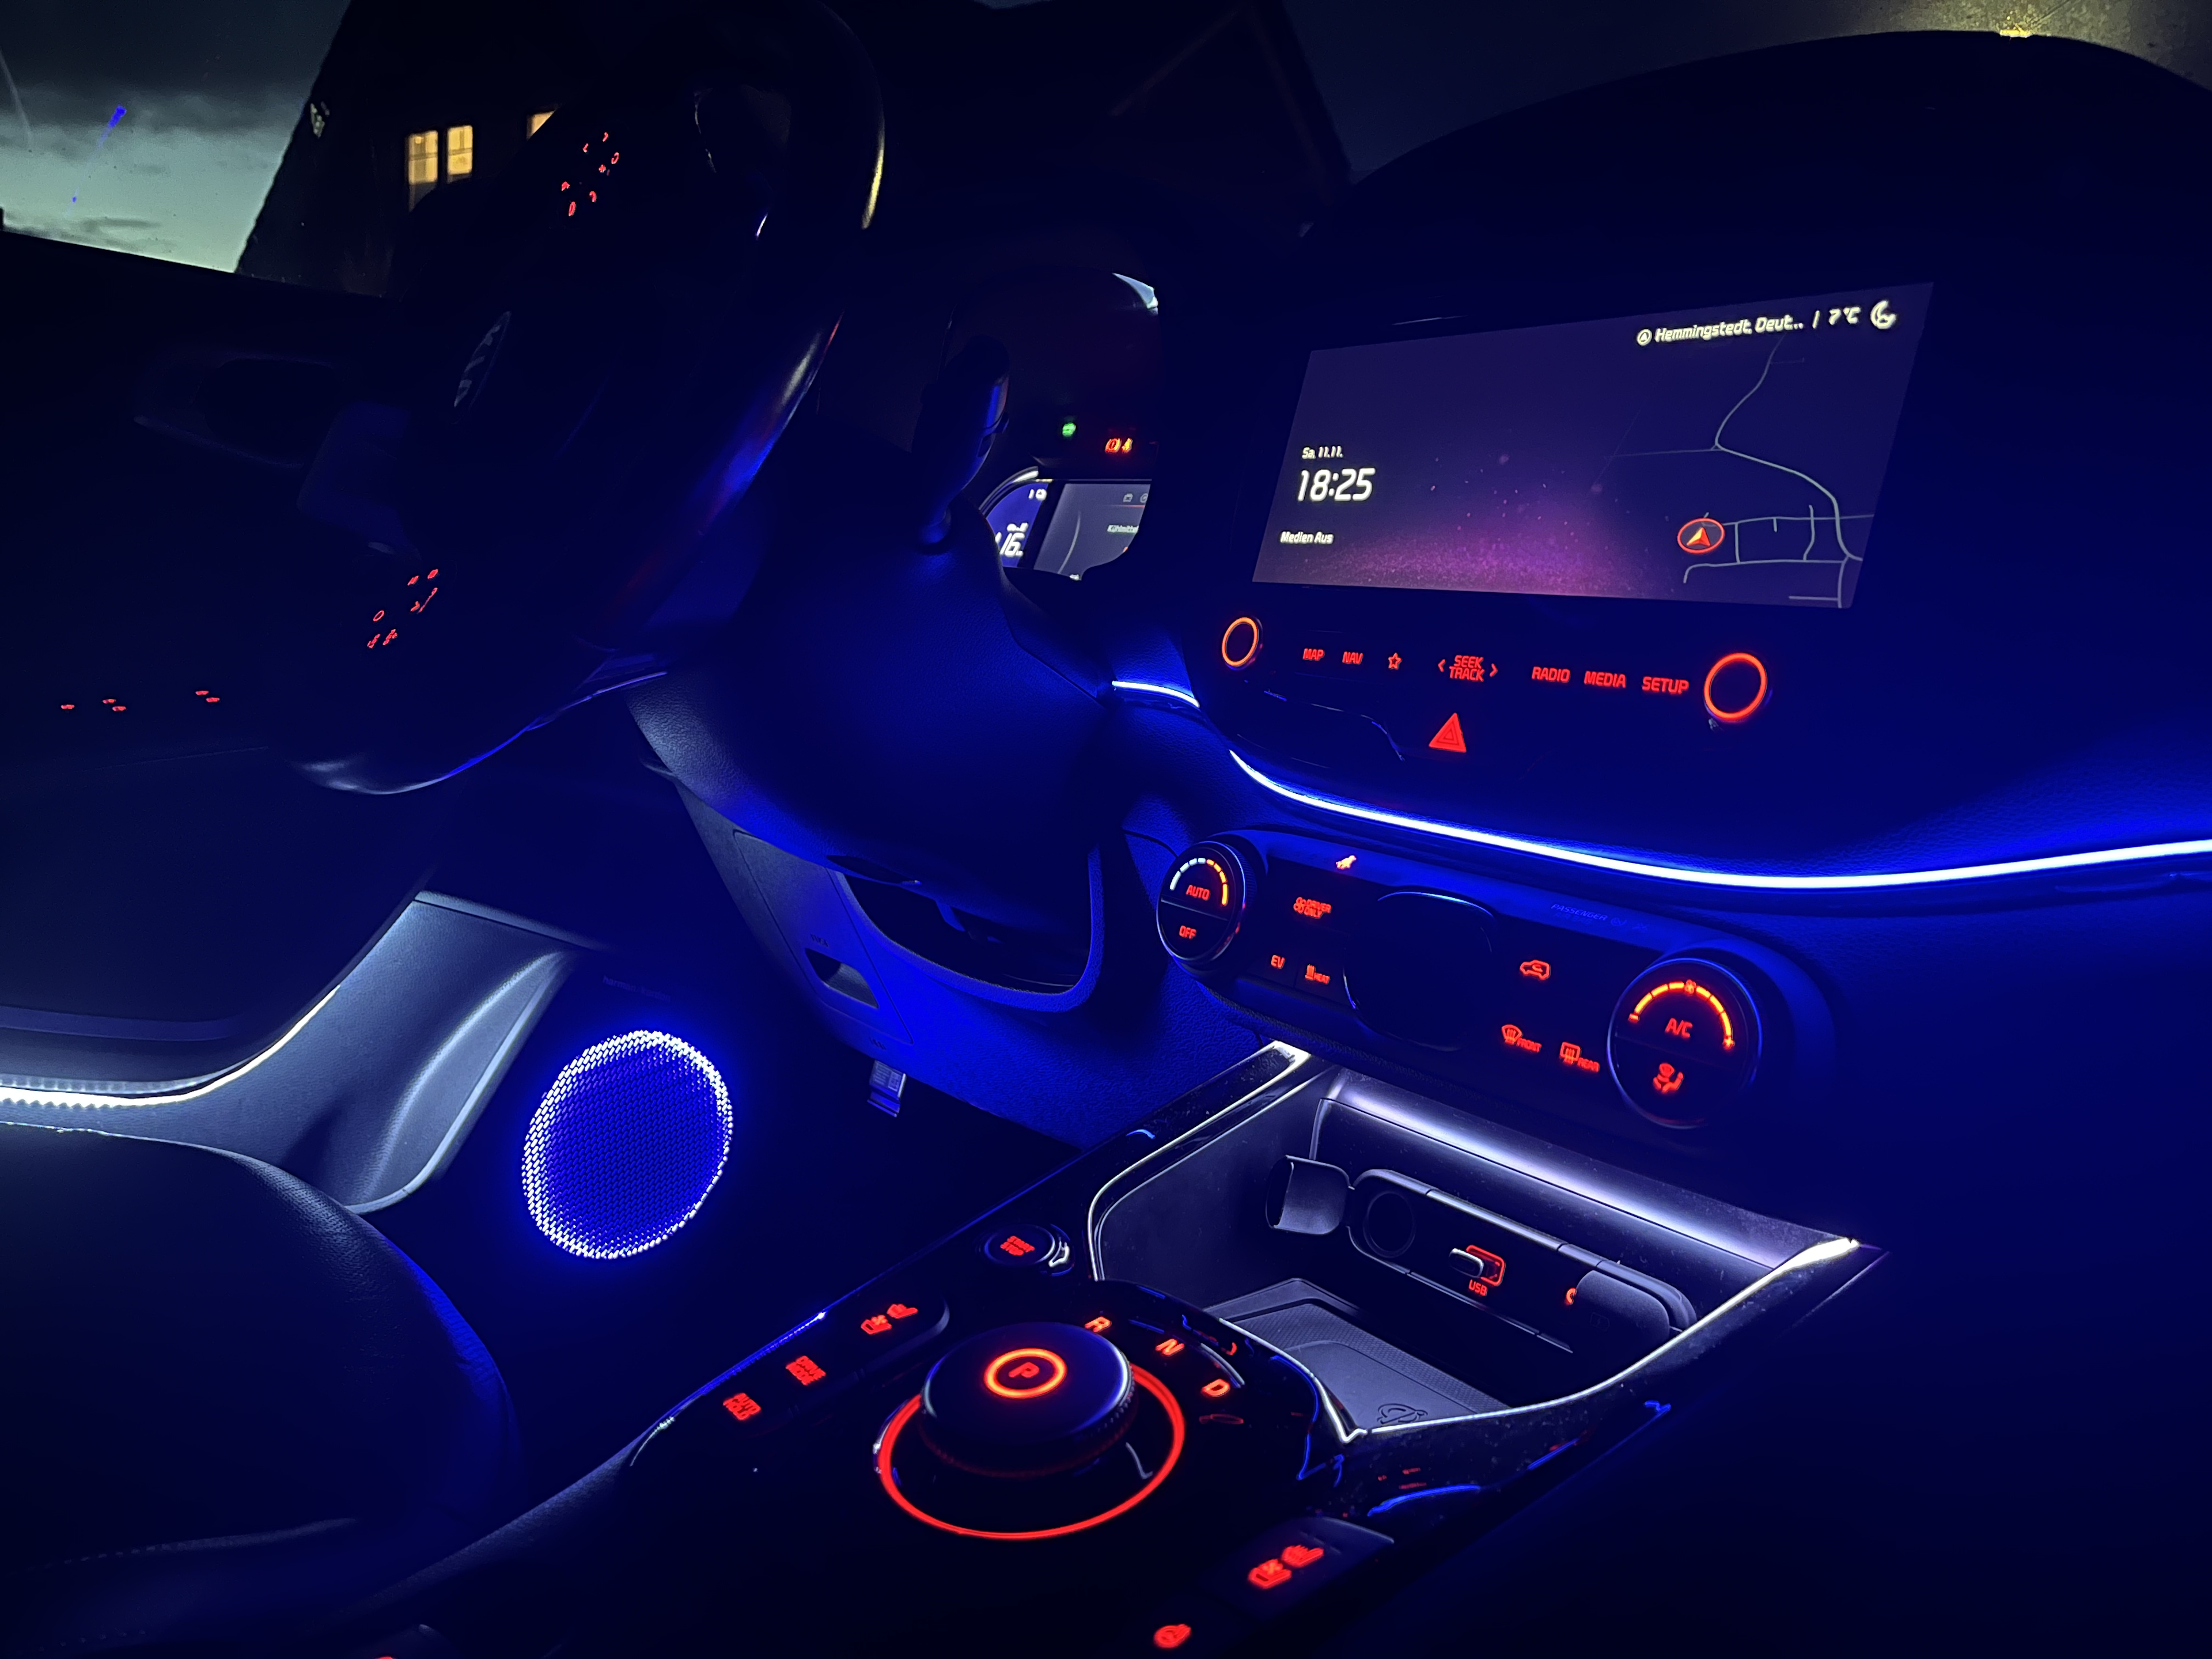 Glowing ambient light strip under the in-car infotainment display